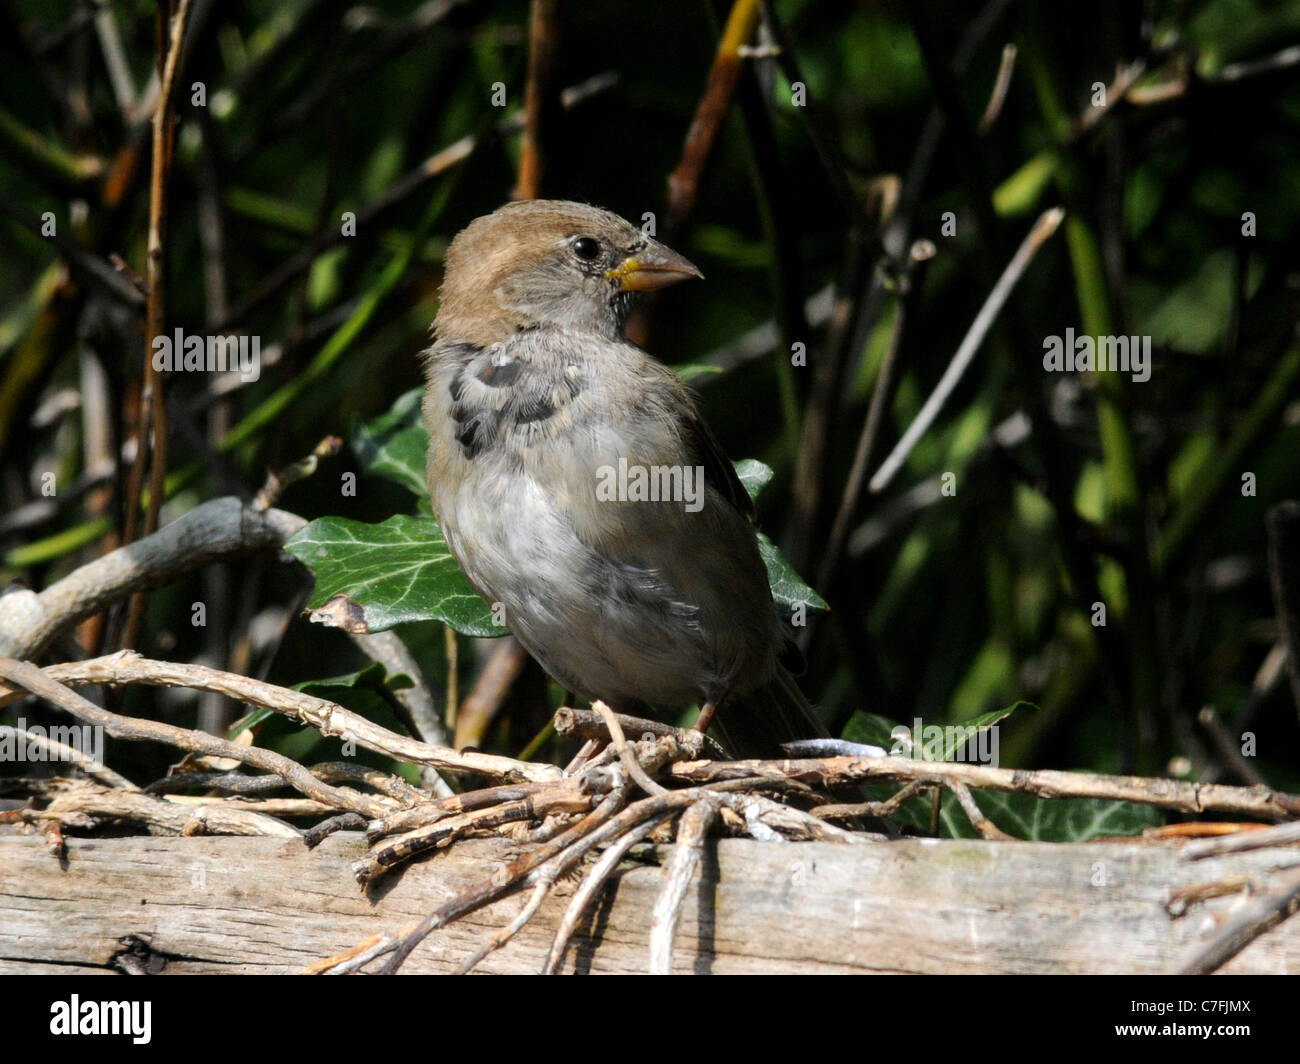 A young house sparrow sitting on a fence, starting to build a nest. Stock Photo